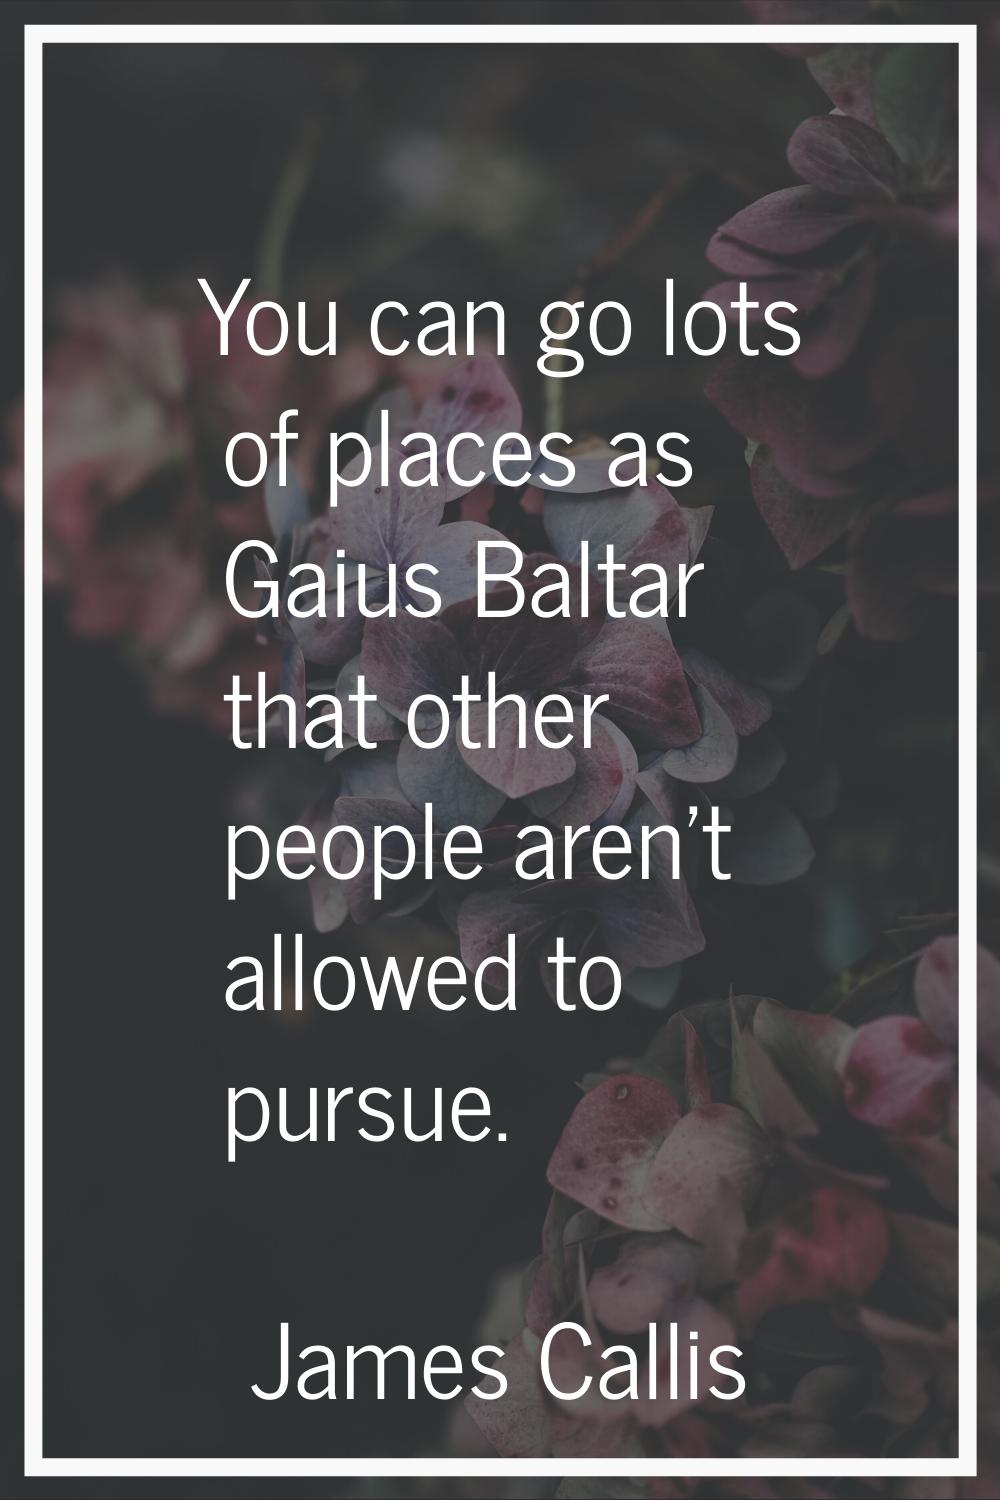 You can go lots of places as Gaius Baltar that other people aren't allowed to pursue.